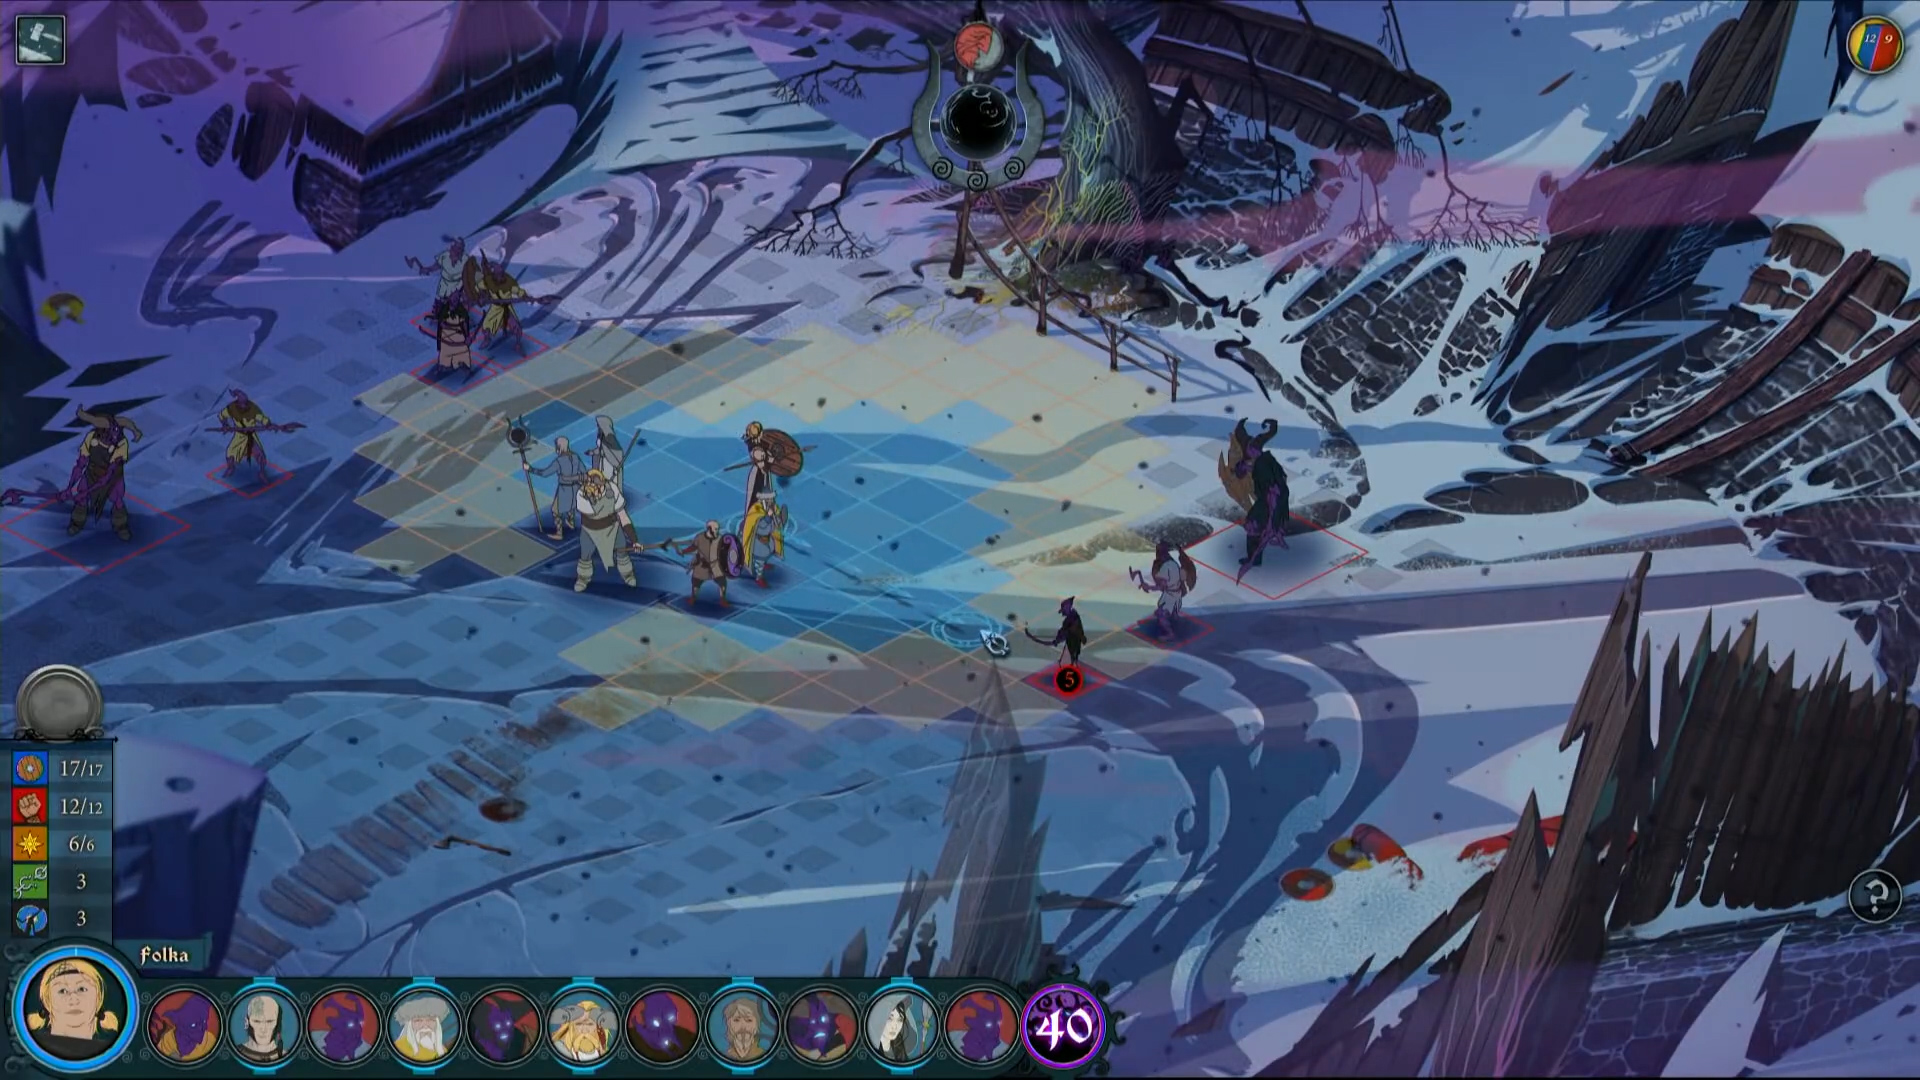 A snowy battlefield is shown in The Banner Saga 3